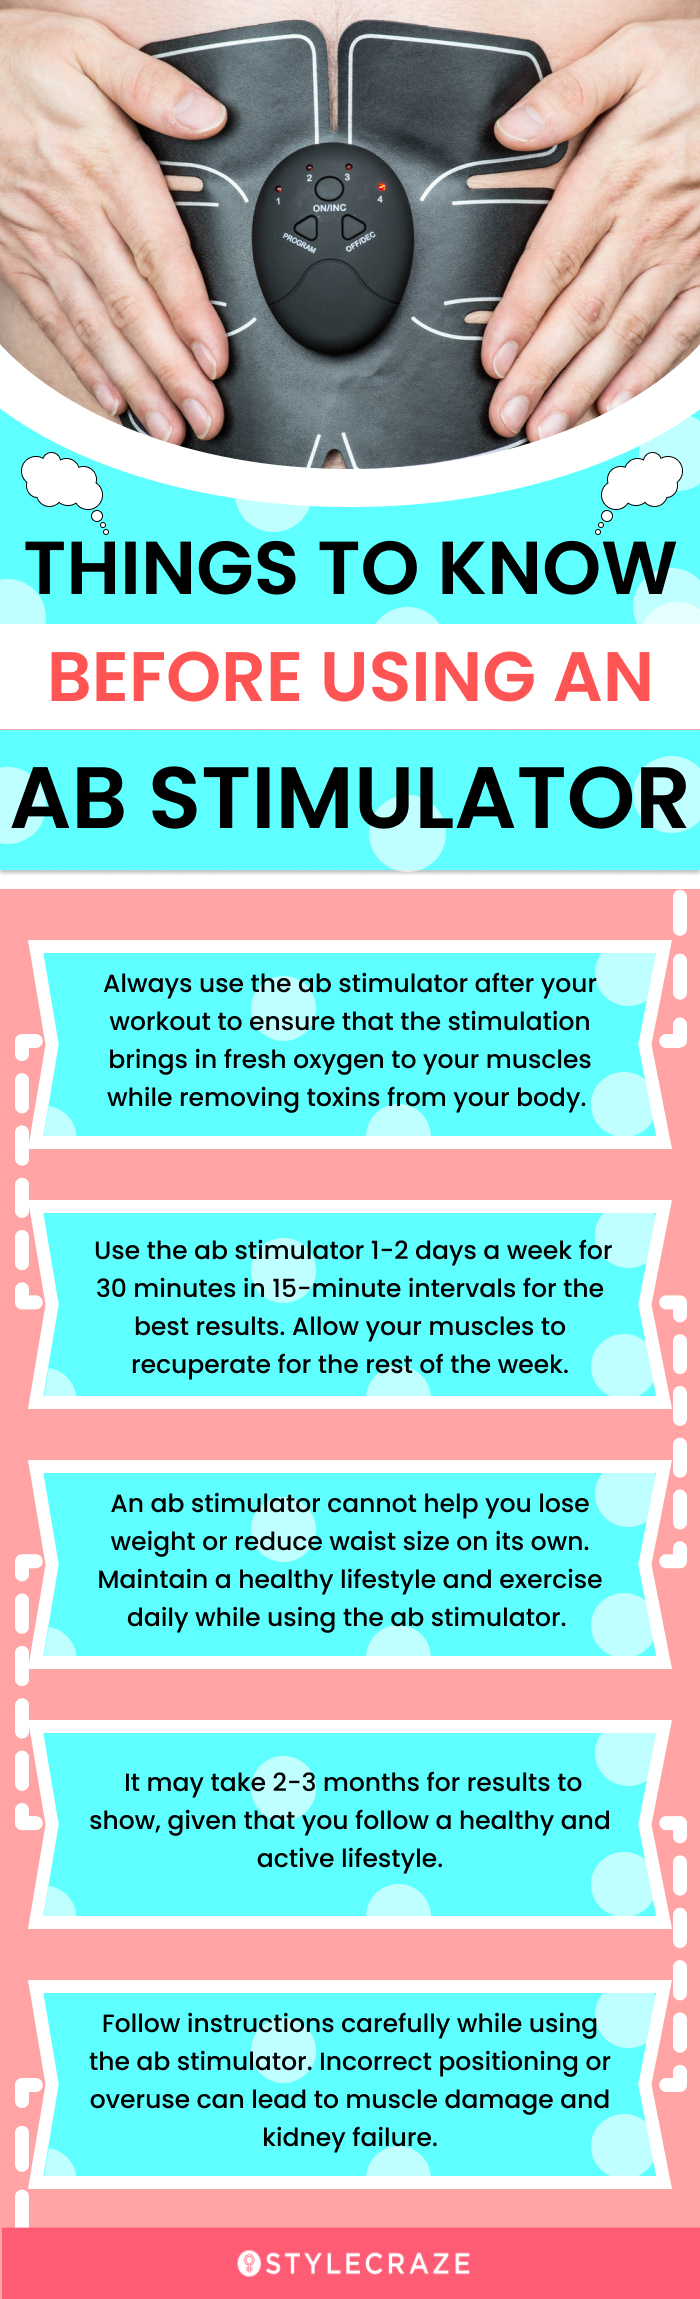 Things To Know Before Using An Ab Stimulator(infographic)